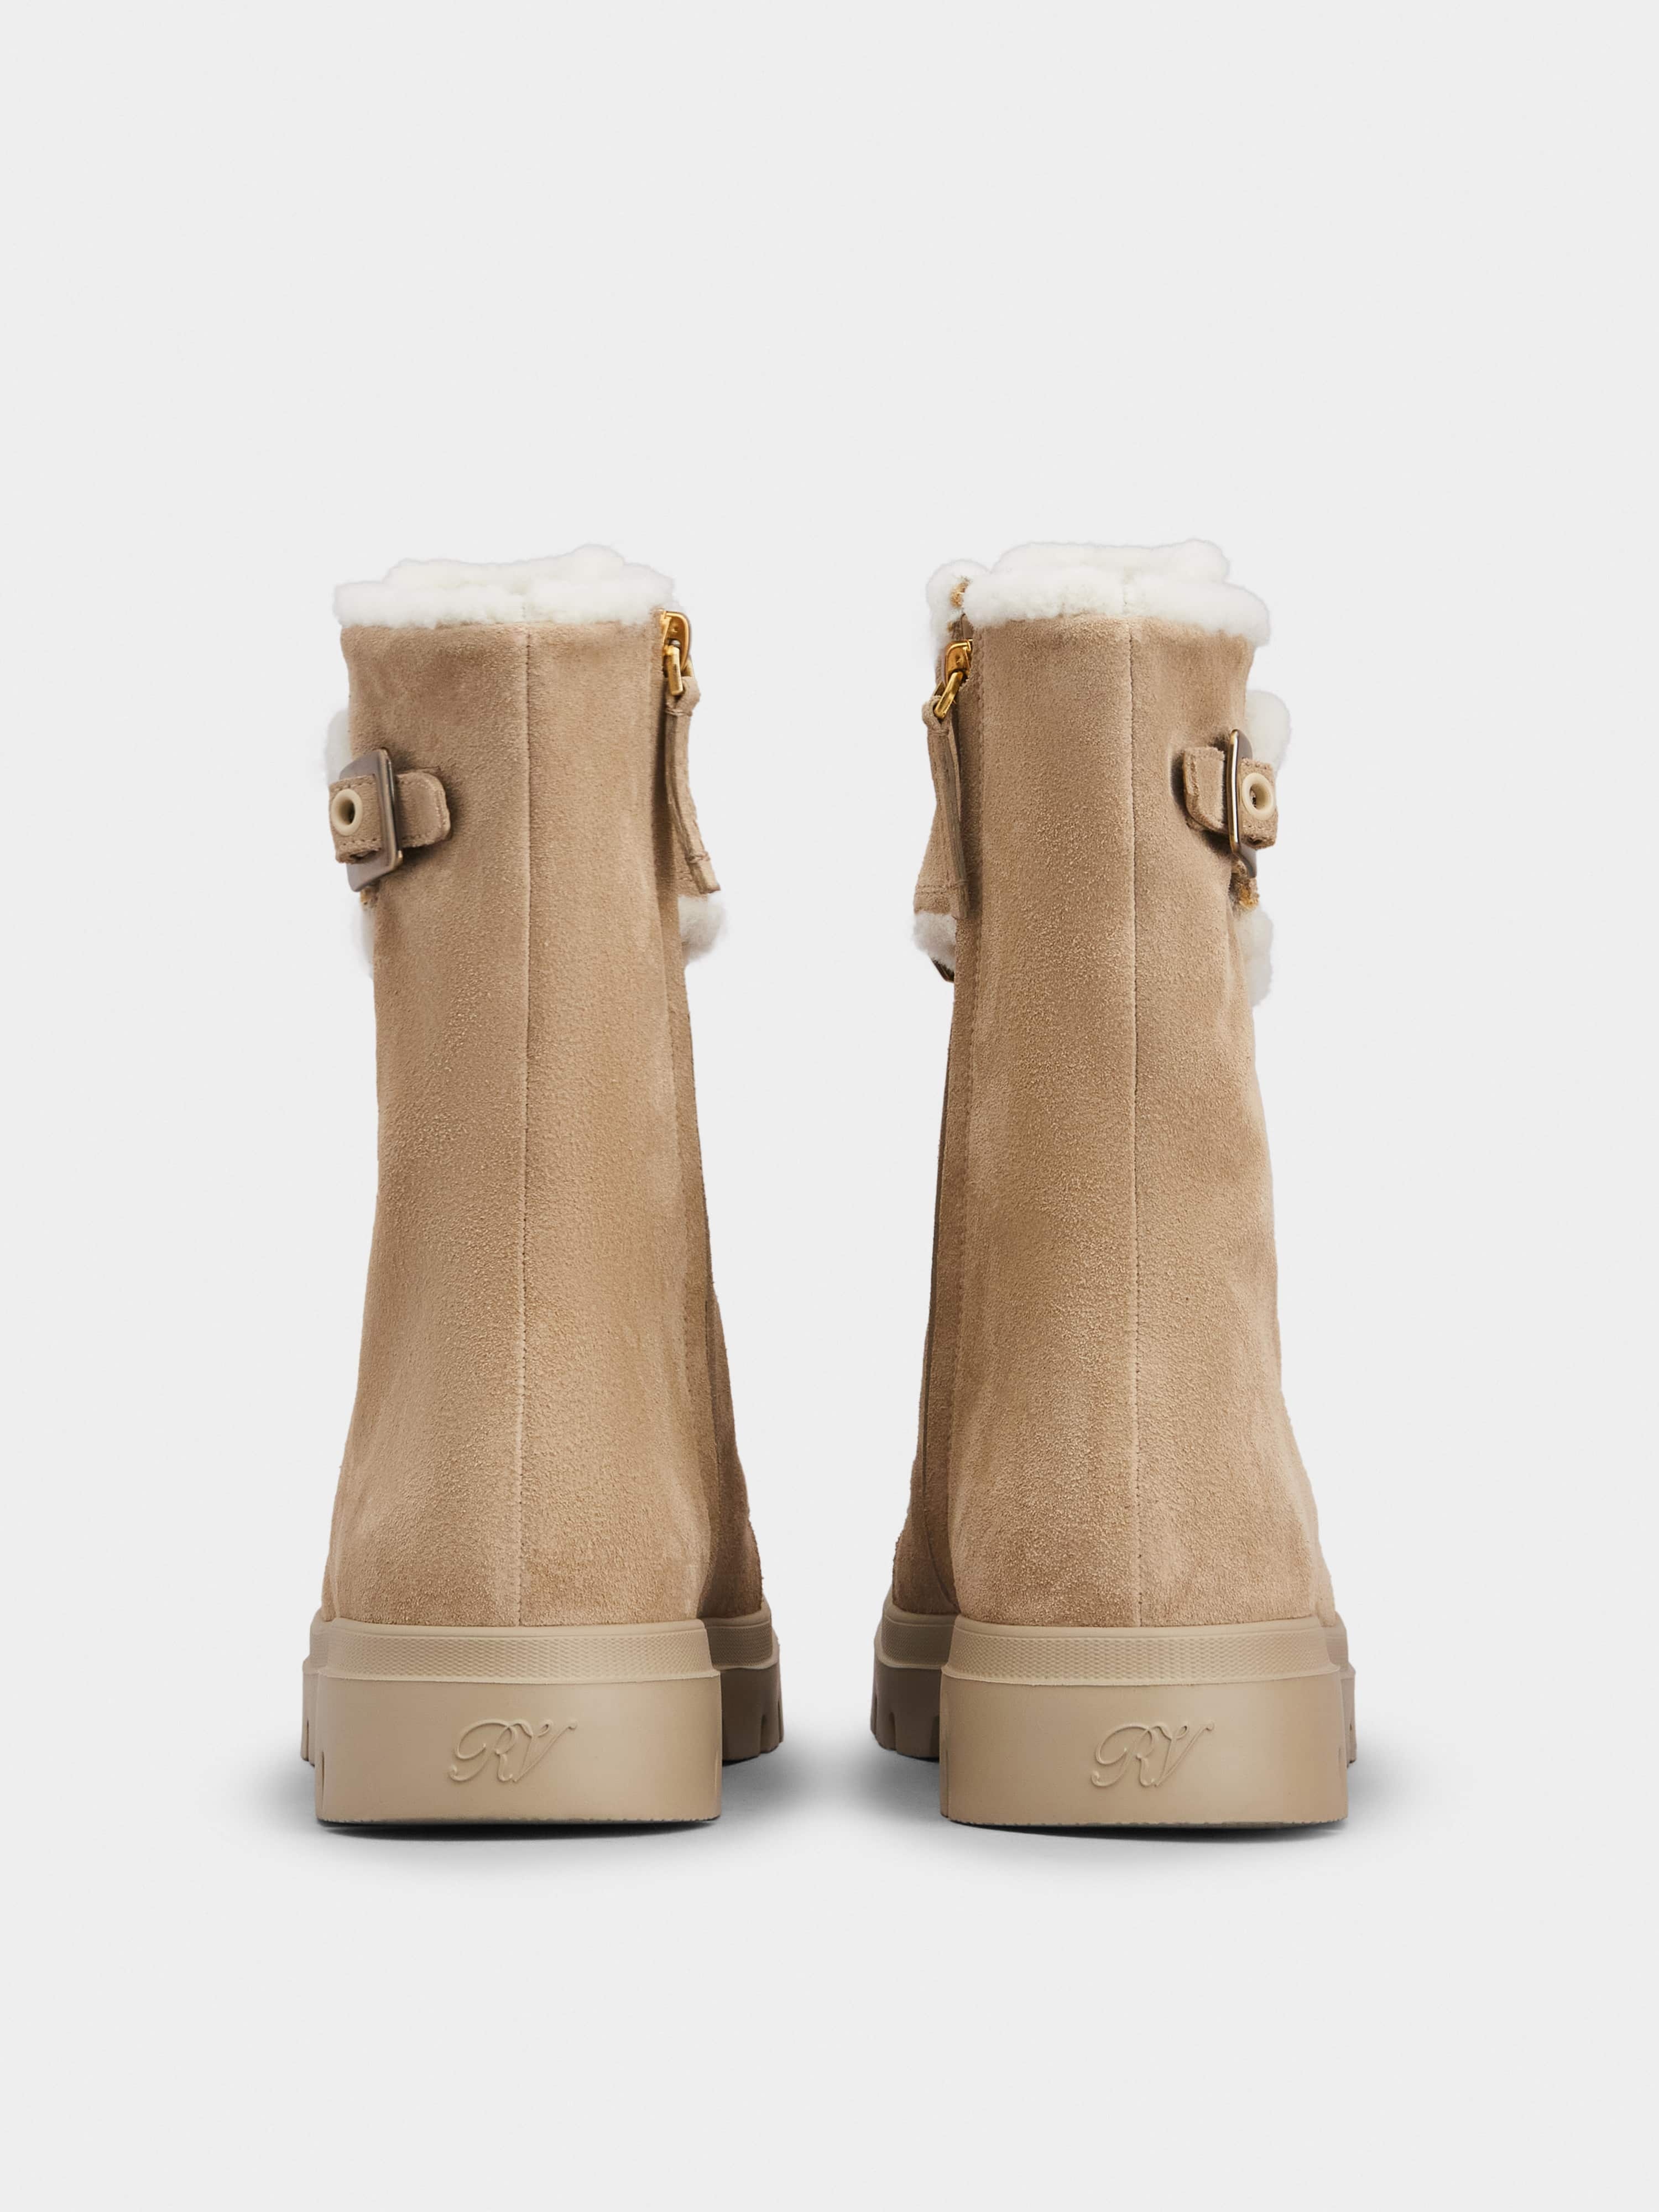 Walky Viv' Lace Up Shearling Strass Buckle Booties in Suede - 5